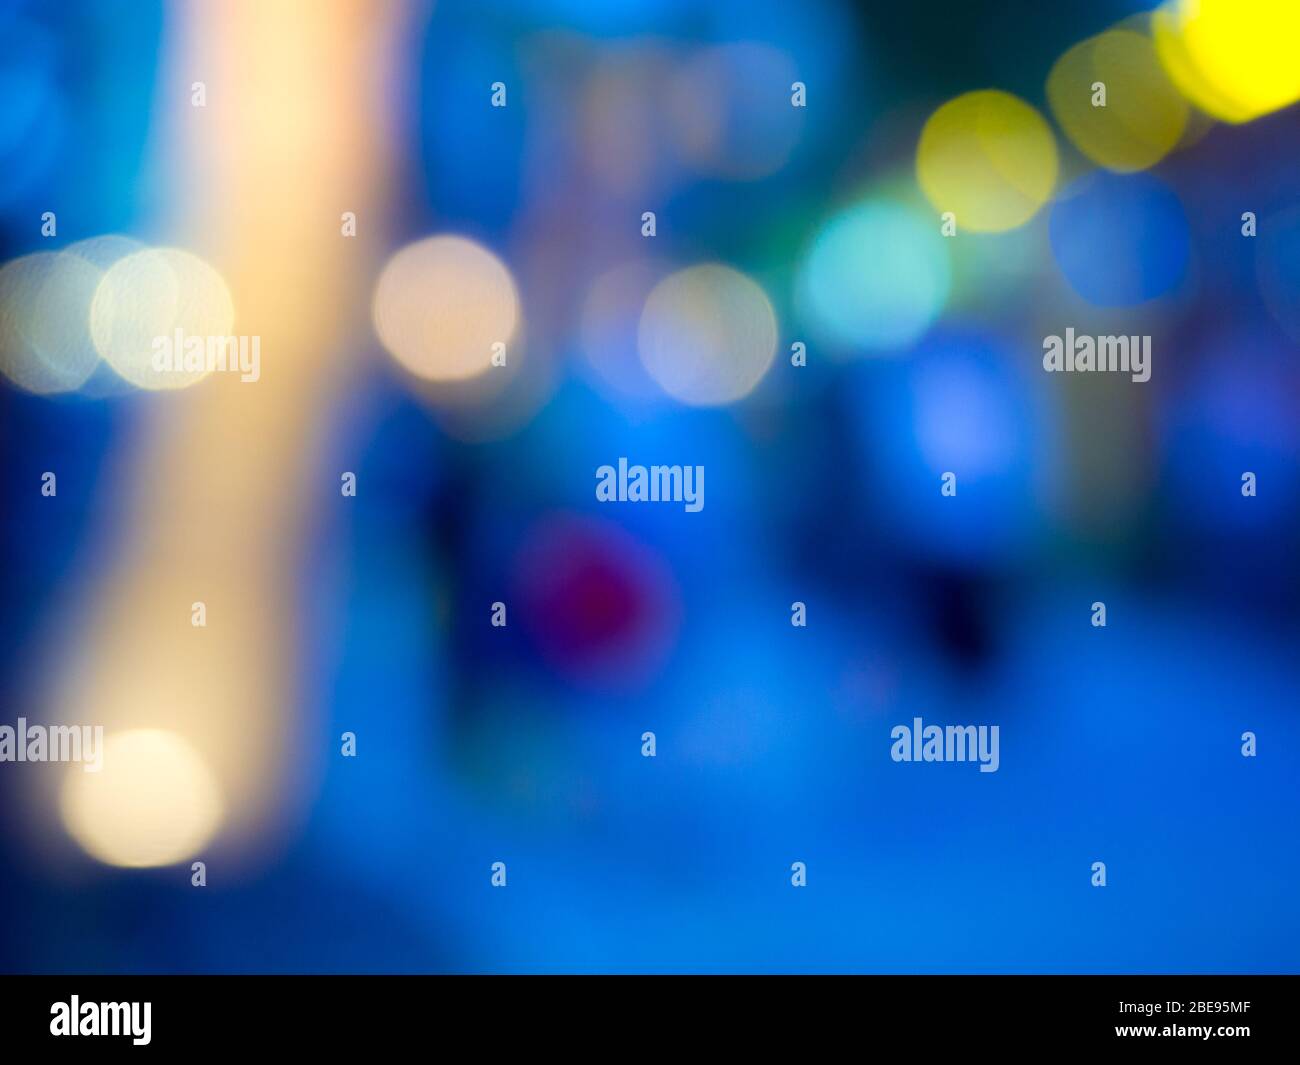 Background formed by blurred reflections of colored lights. Stock Photo